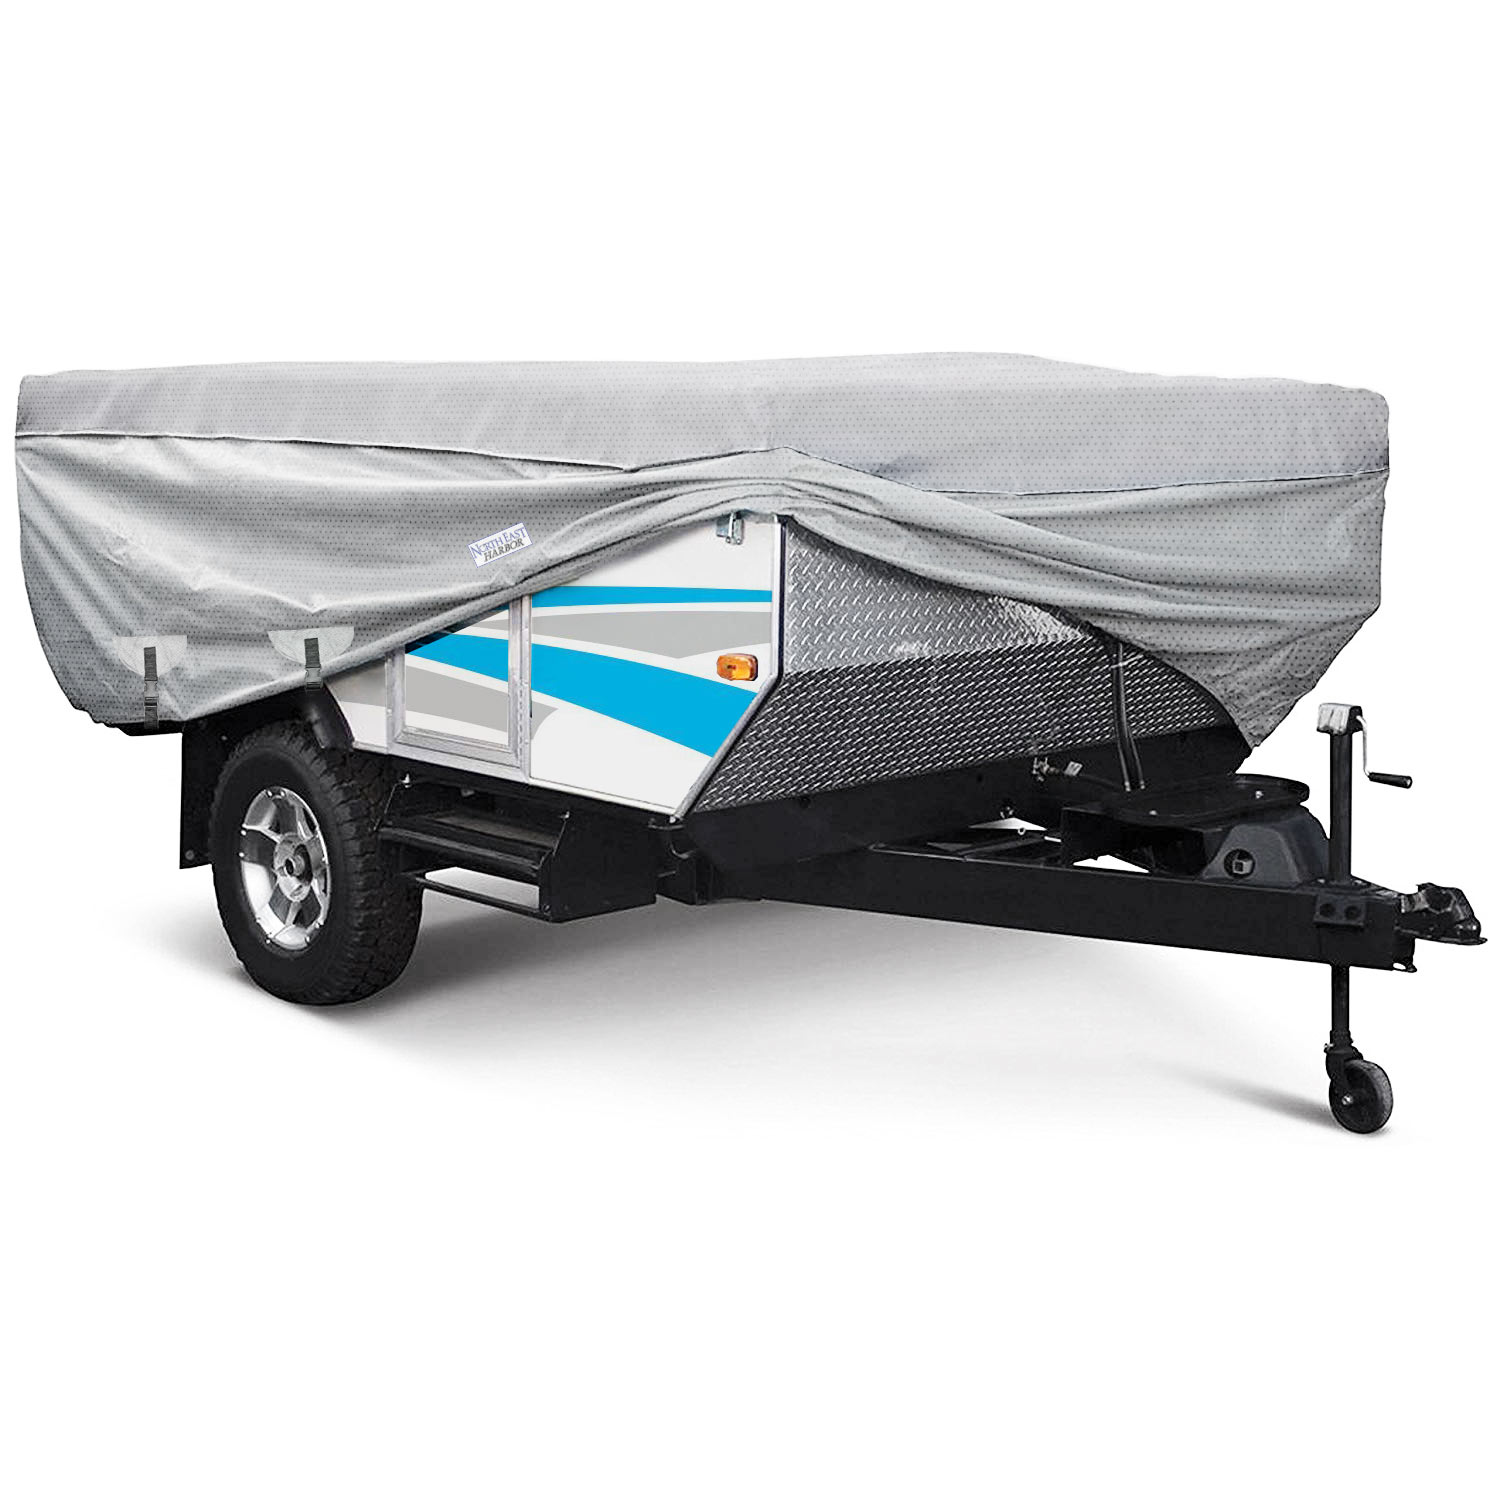 North East Harbor Waterproof Superior Folding Camping Travel Trailer Storage Cover Fits Length 8'-10' Foot Heavy Duty 4 Layer Fabric Pop-Up Tent